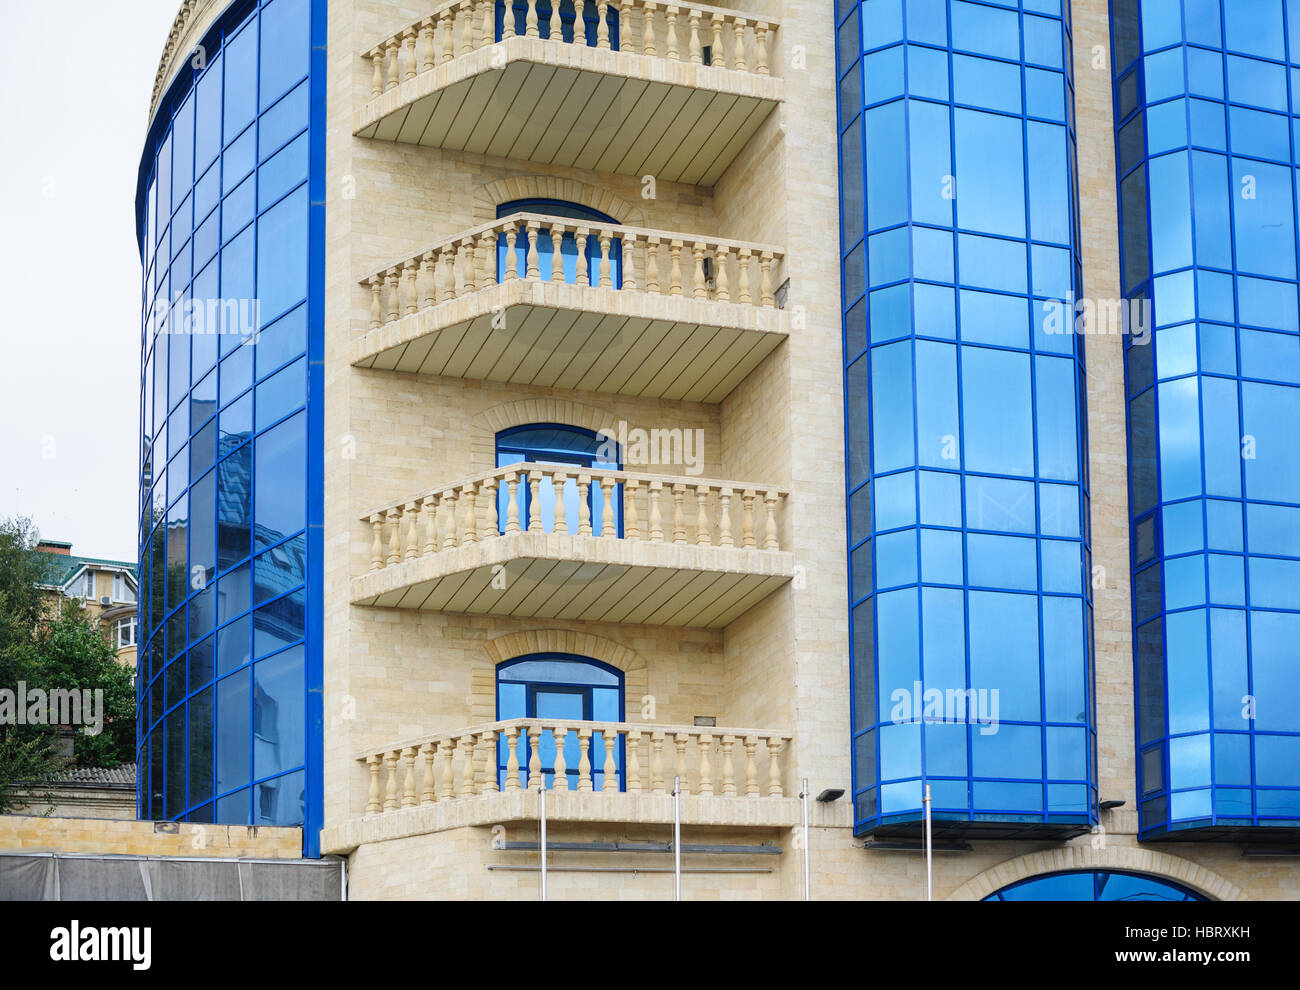 multi-storey office building with balconies Stock Photo